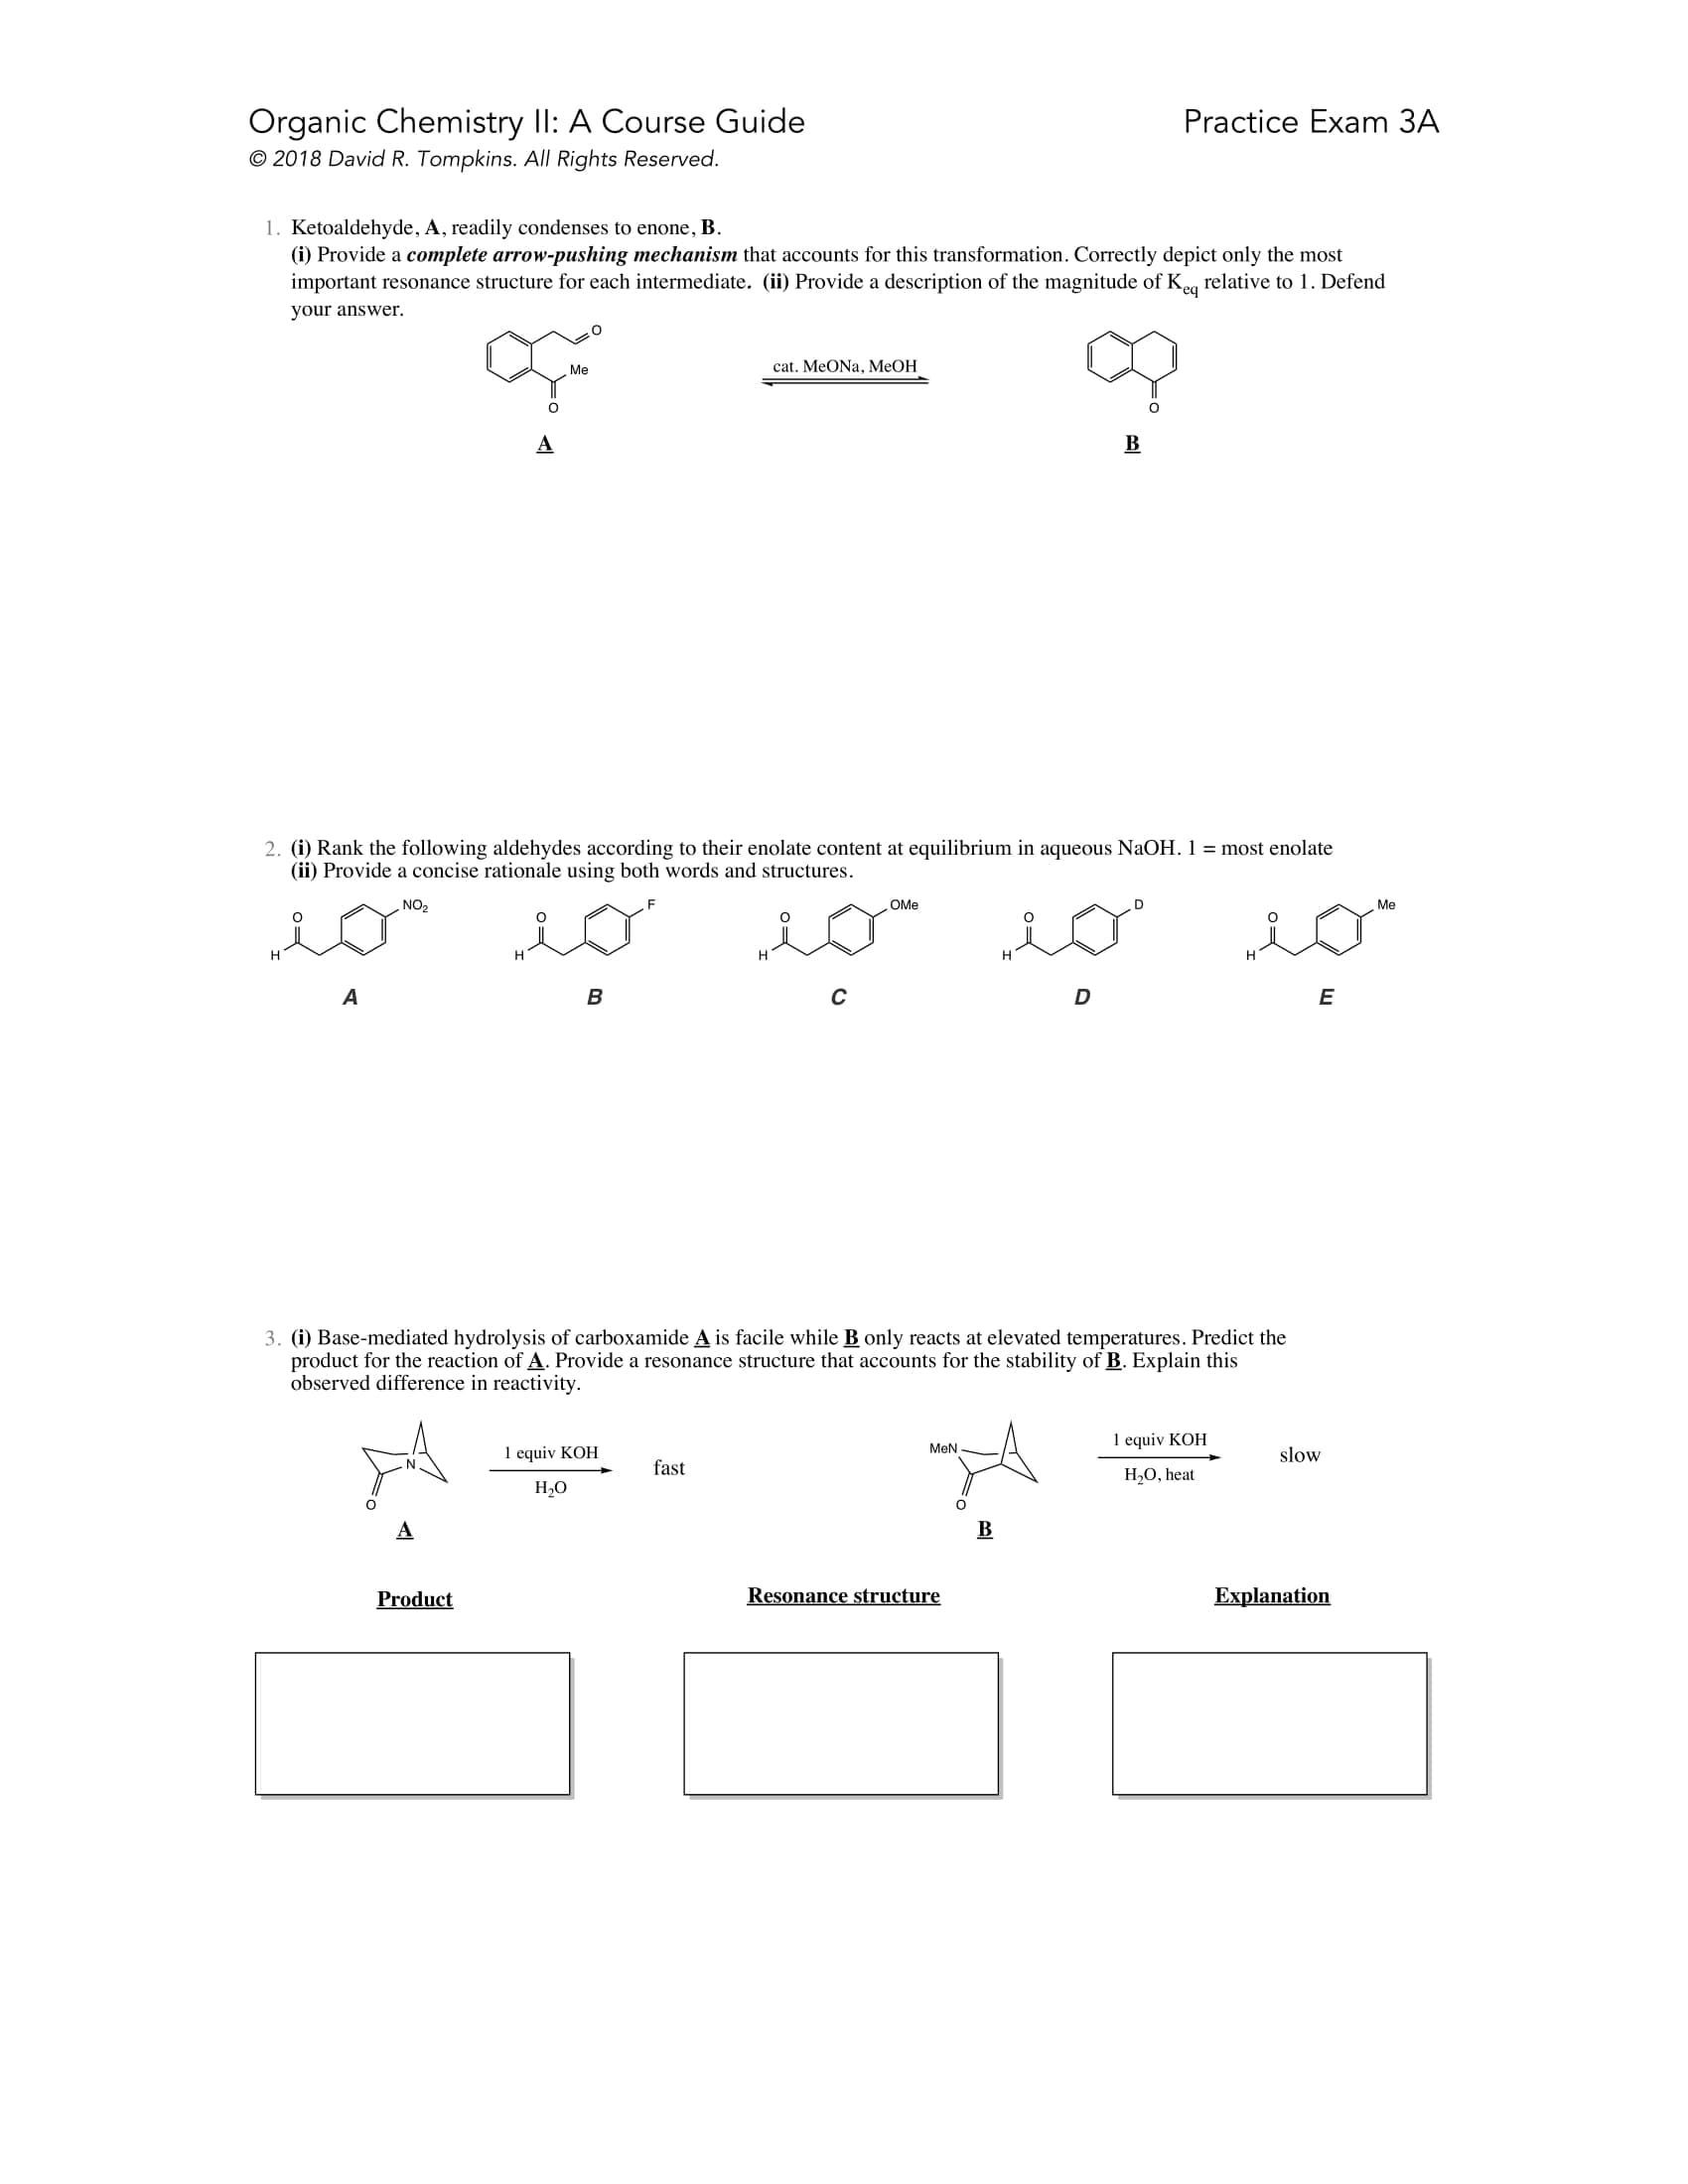 Introduction to Organic Chemistry II Course Guide Example Page 1